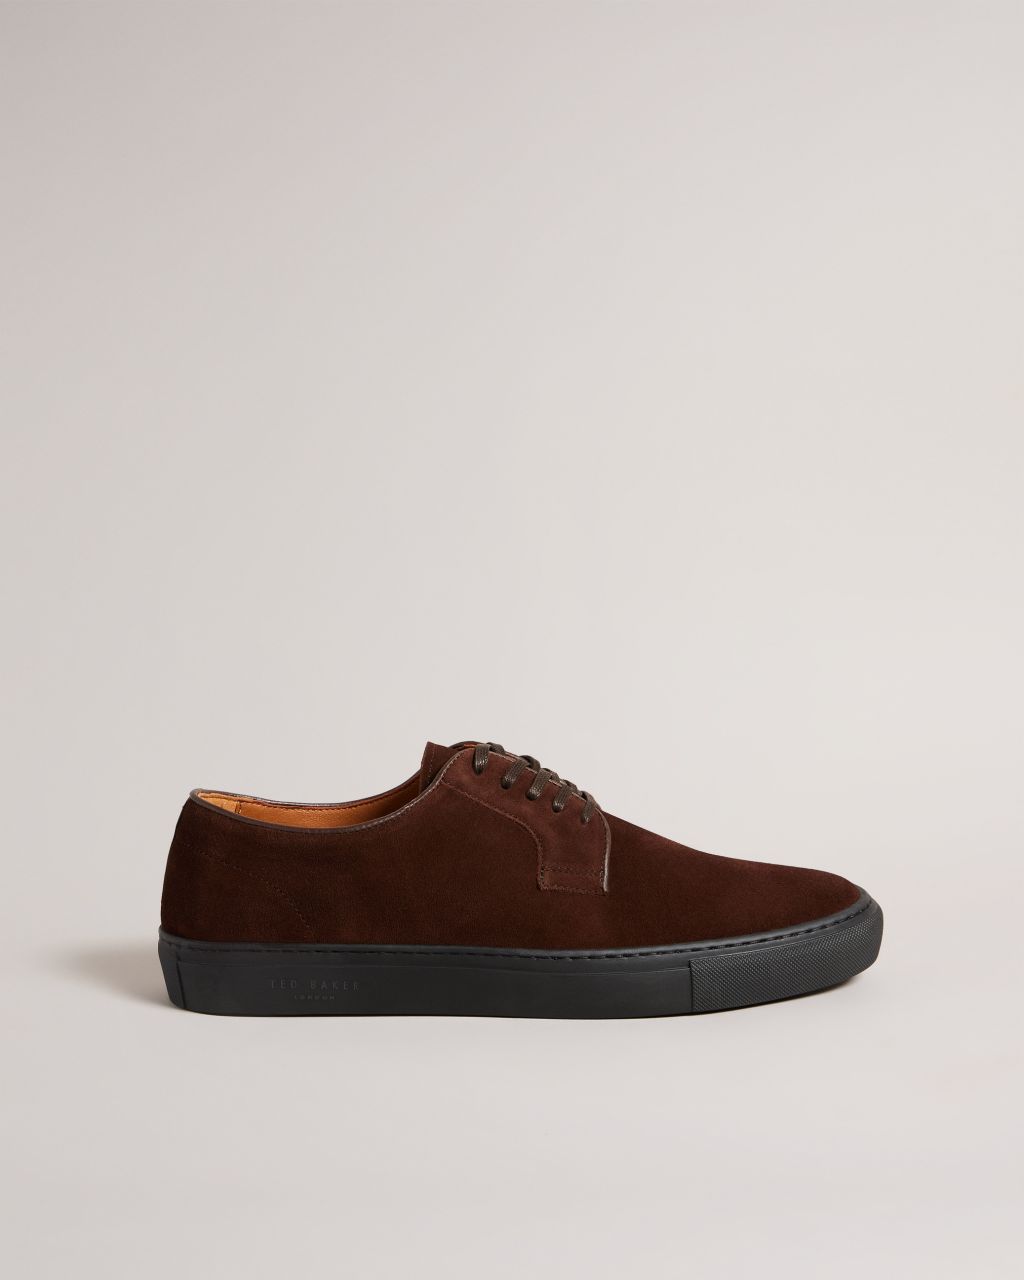 Ted Baker Men's Suede Hybrid Shoes in Brown-Chocolate, Kantens, Leather